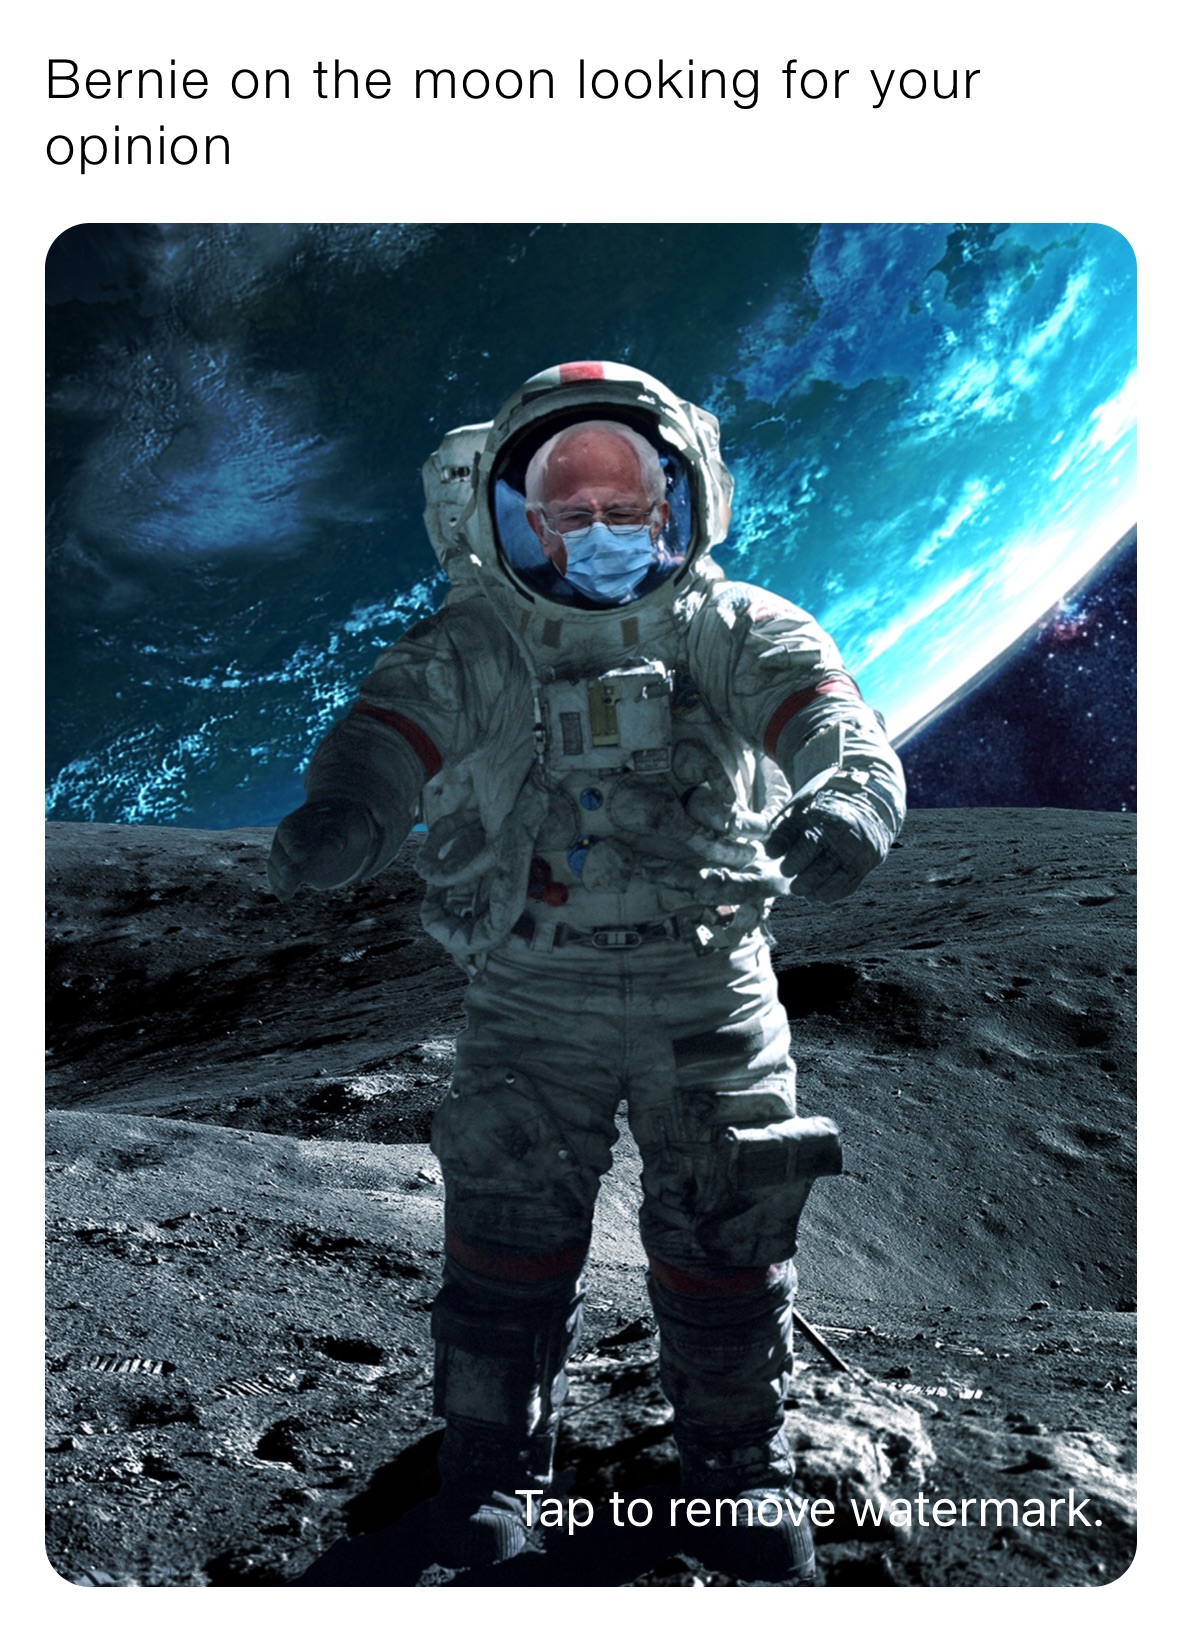 Bernie on the moon looking for your opinion